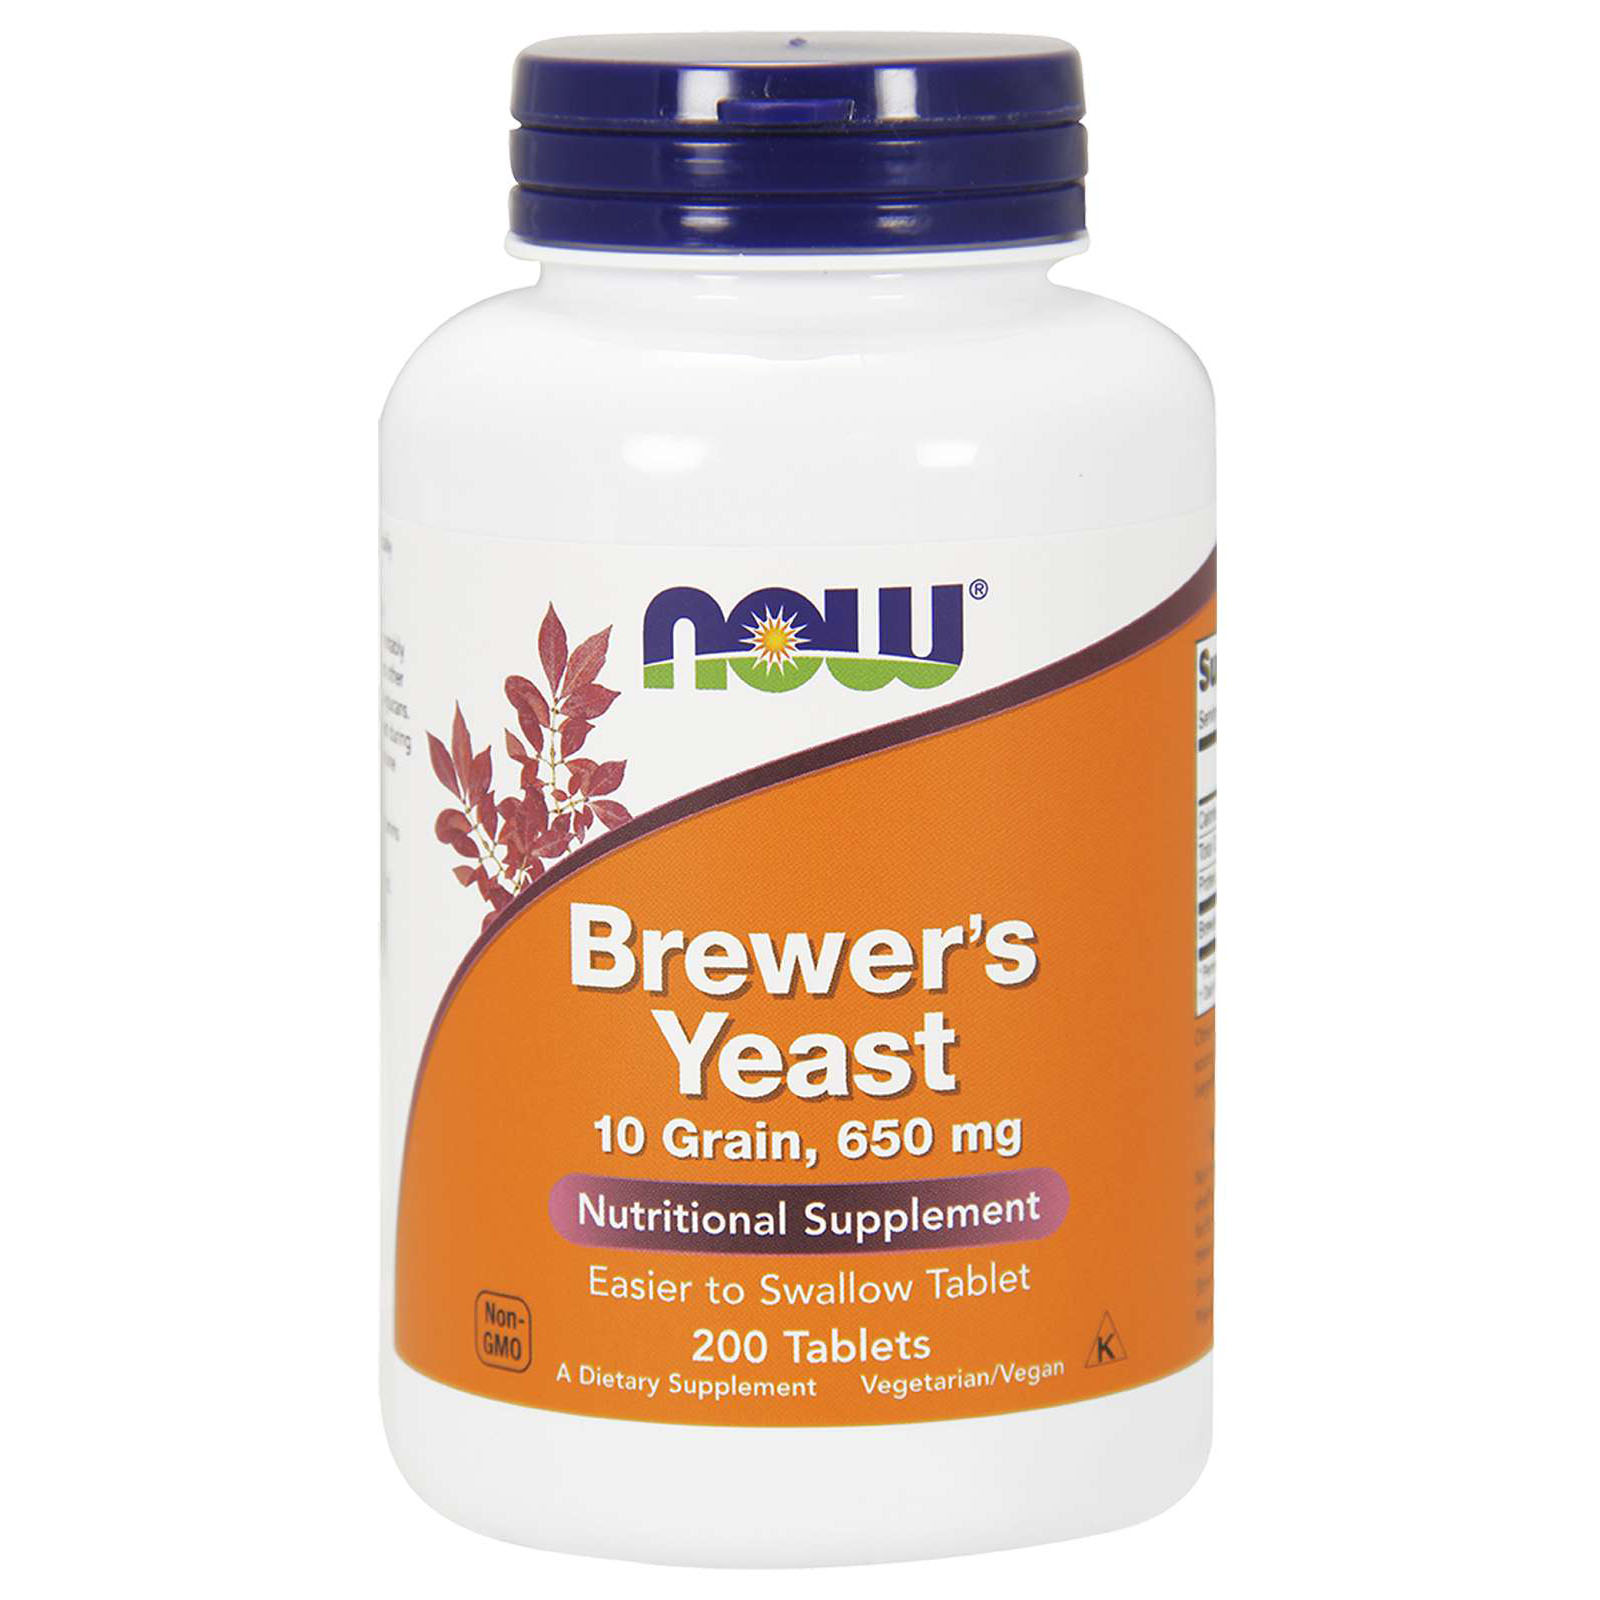 BREWER’S YEAST 650 MG – 200 TABS